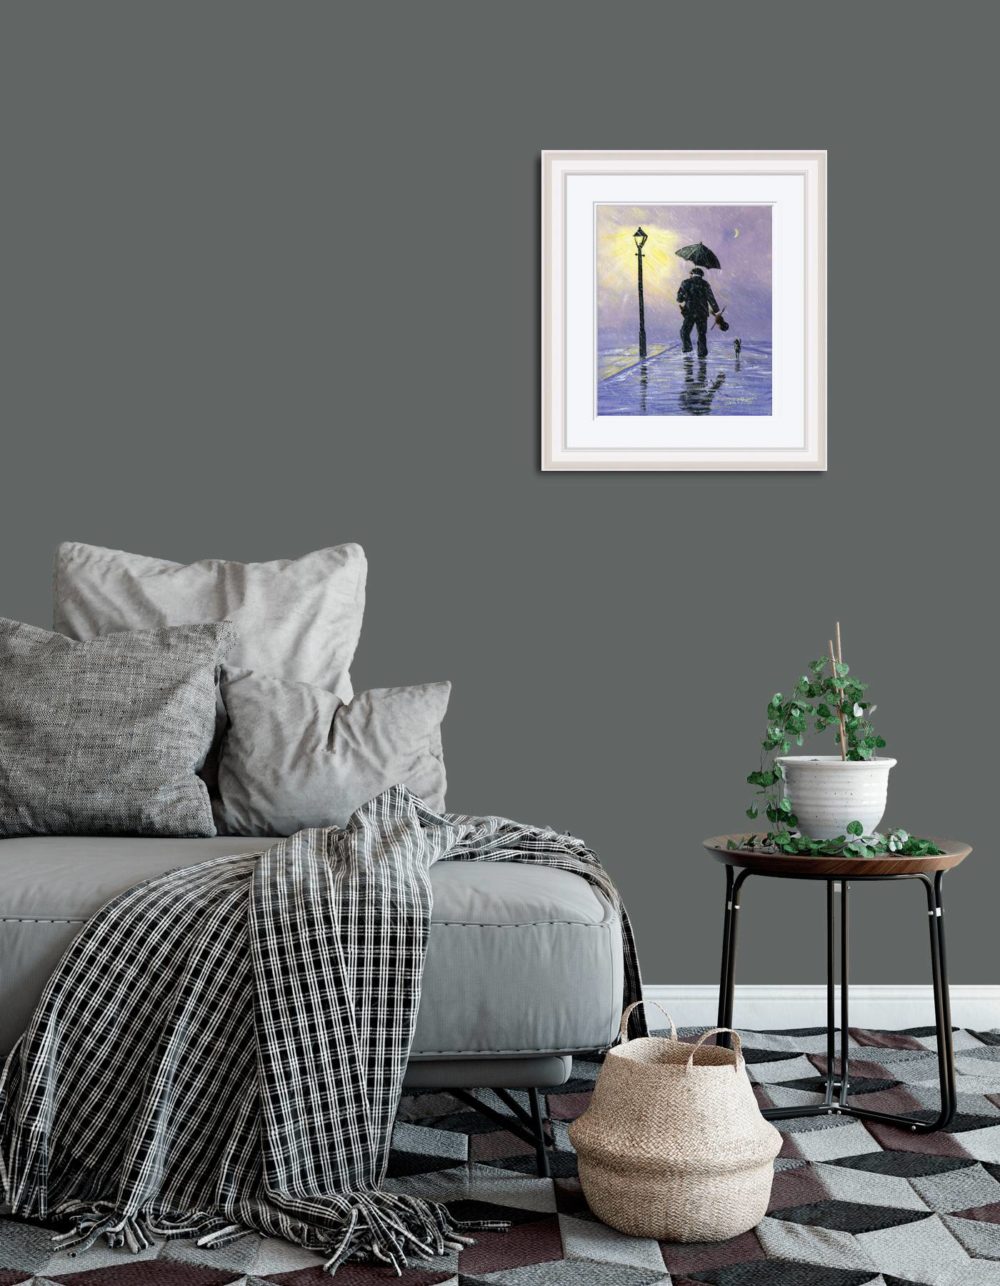 Raindrops Keep Falling Print (Small) In White Frame In Room